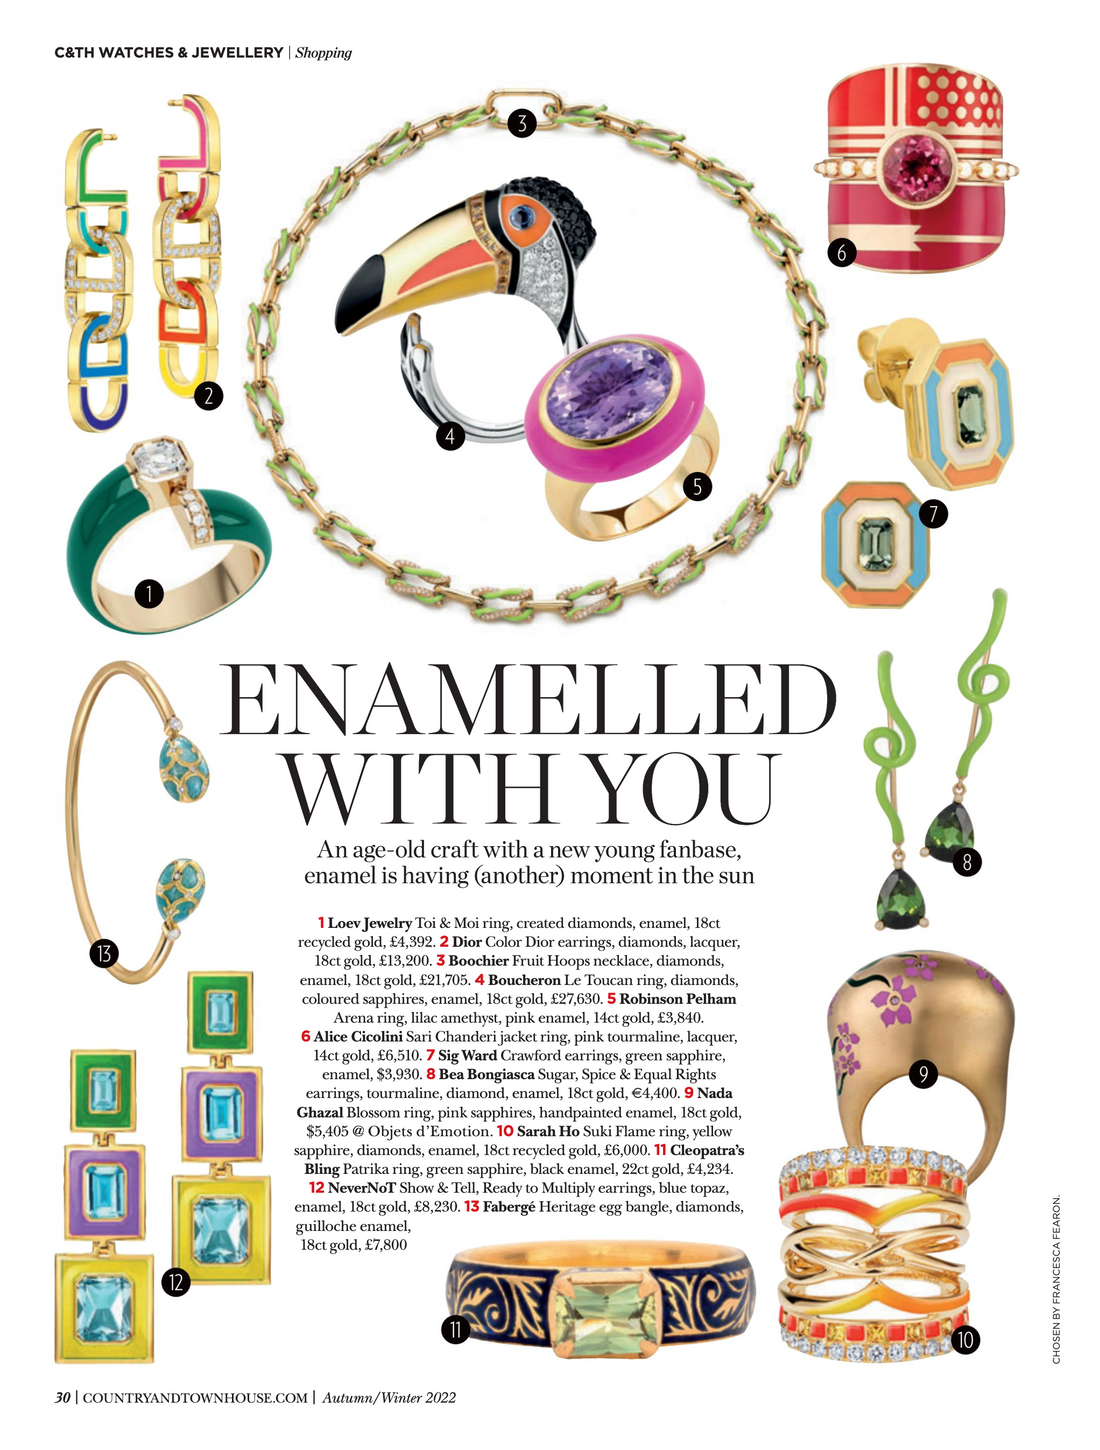 Enamelled with you